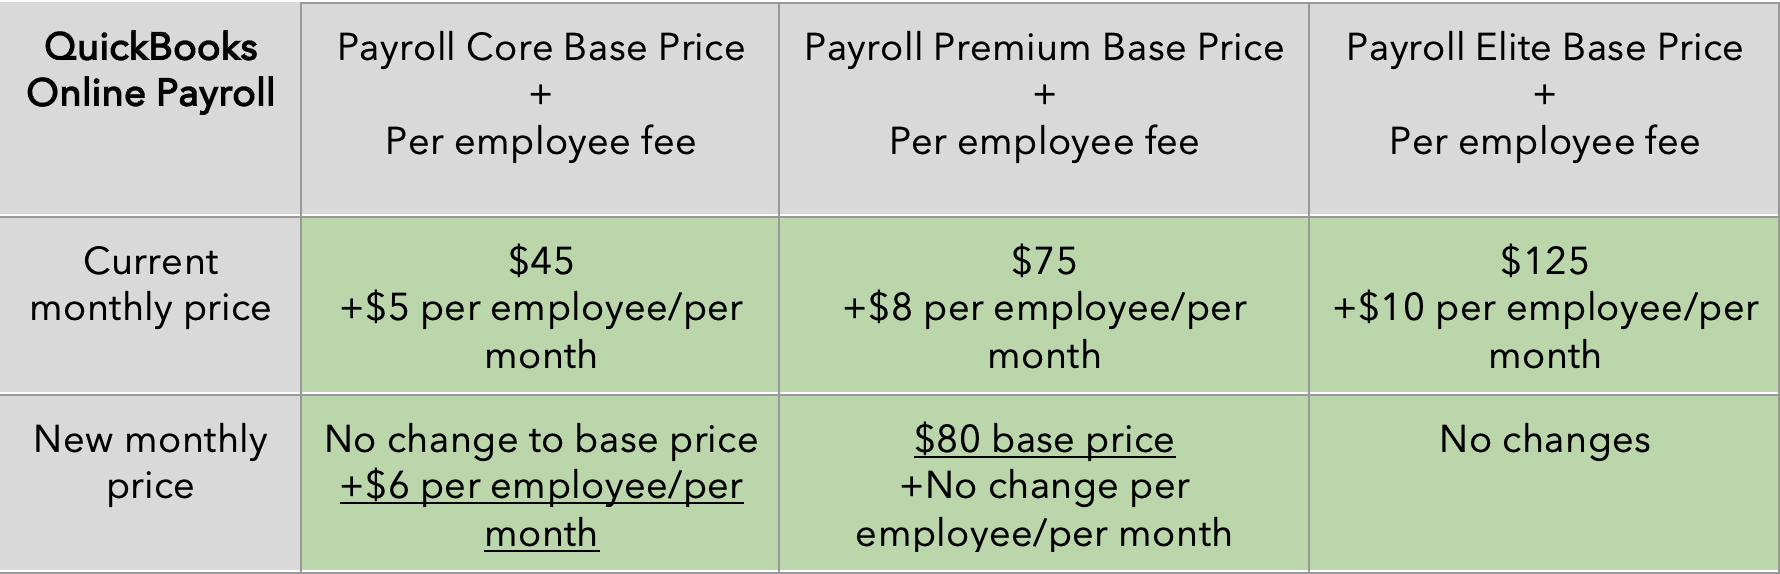 Announcing upcoming changes to QuickBooks pricing + FAQs﻿